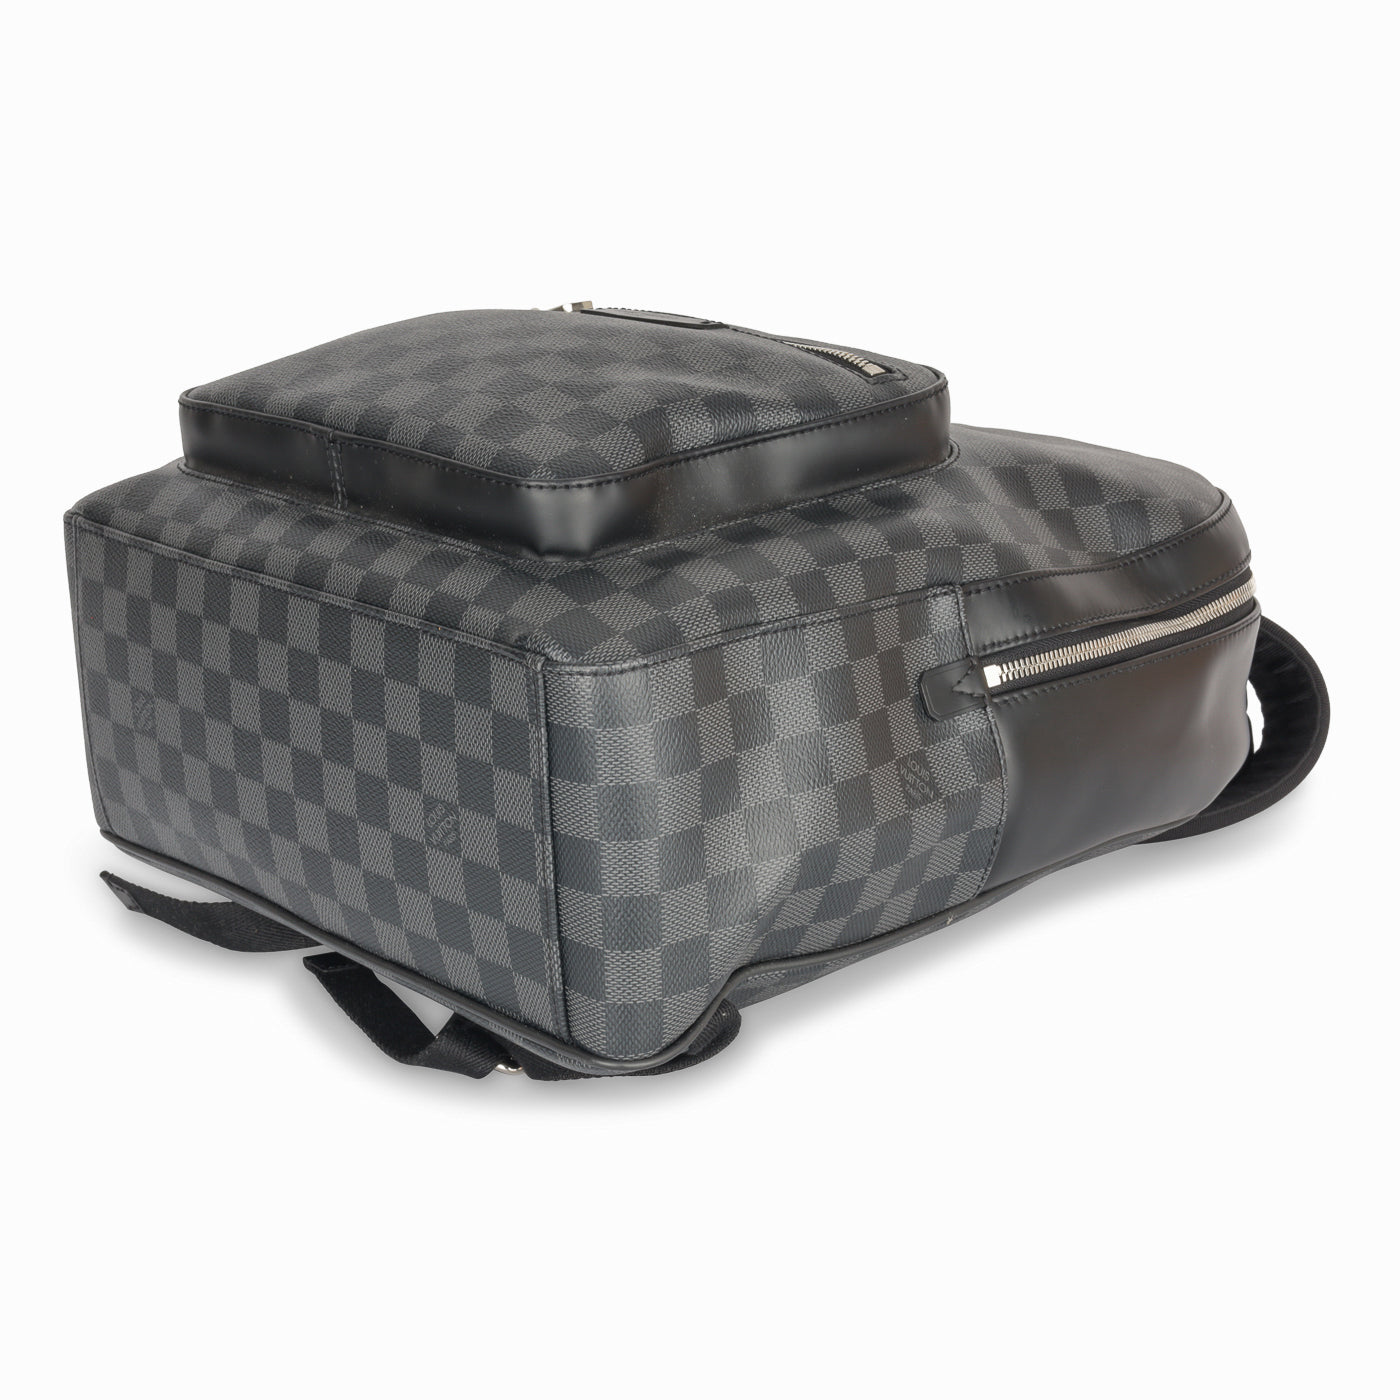 Louis Vuitton Damier Graphite Michael Backpack ○ Labellov ○ Buy and Sell  Authentic Luxury